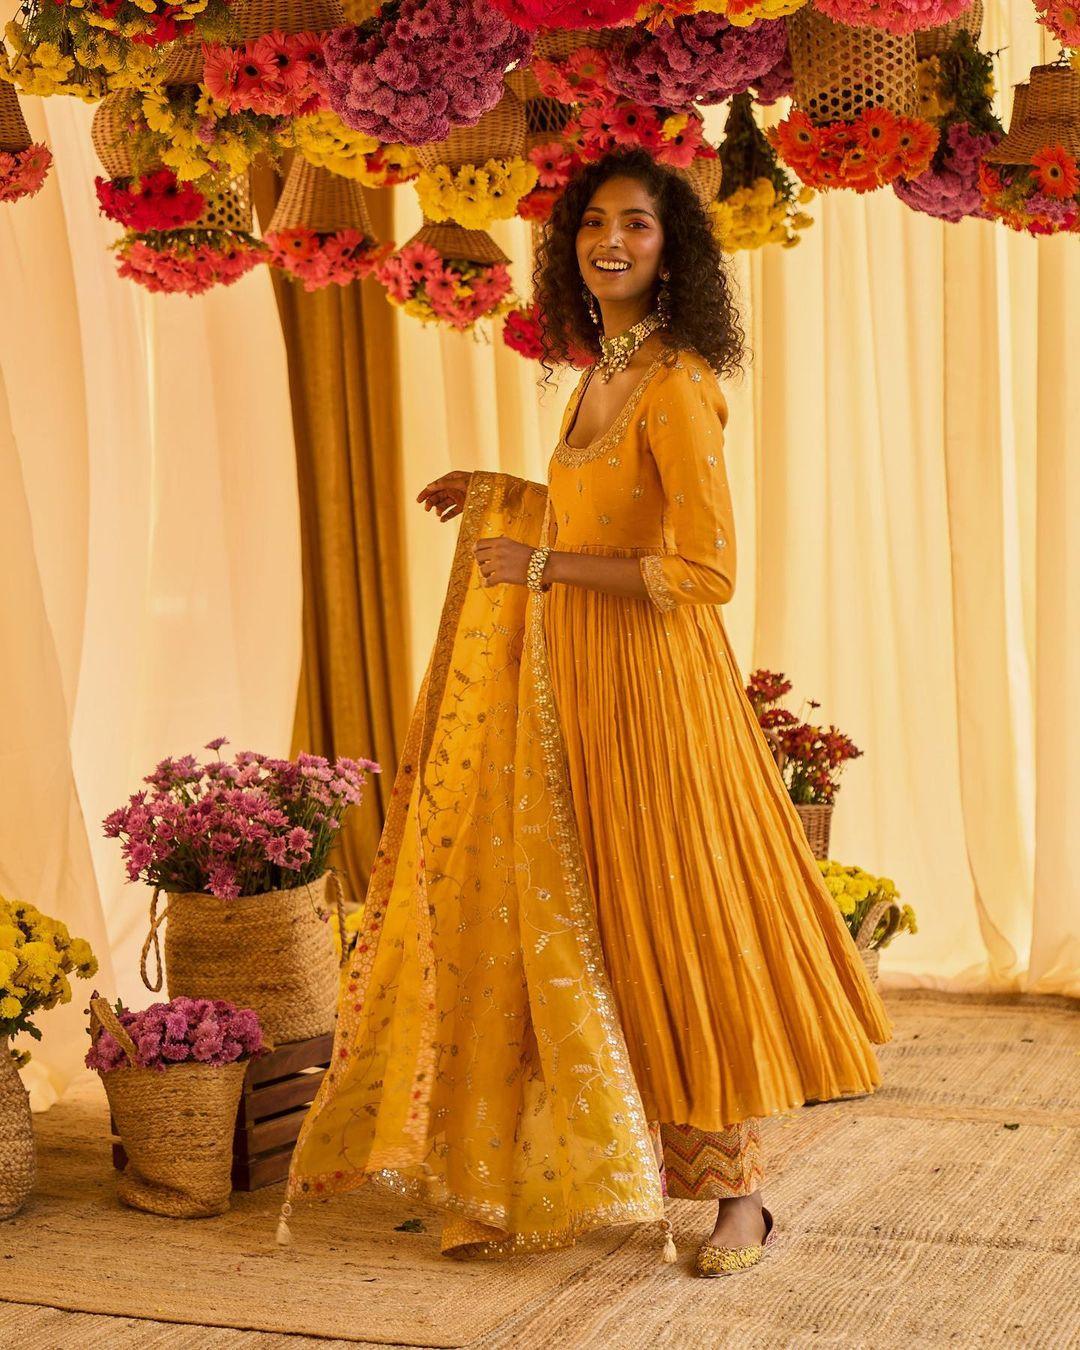 55 Gorgeous Haldi Dresses & Outfits To Inspire You (Latest) | Bridal dress  design, Bride fashion photography, Bride photography poses